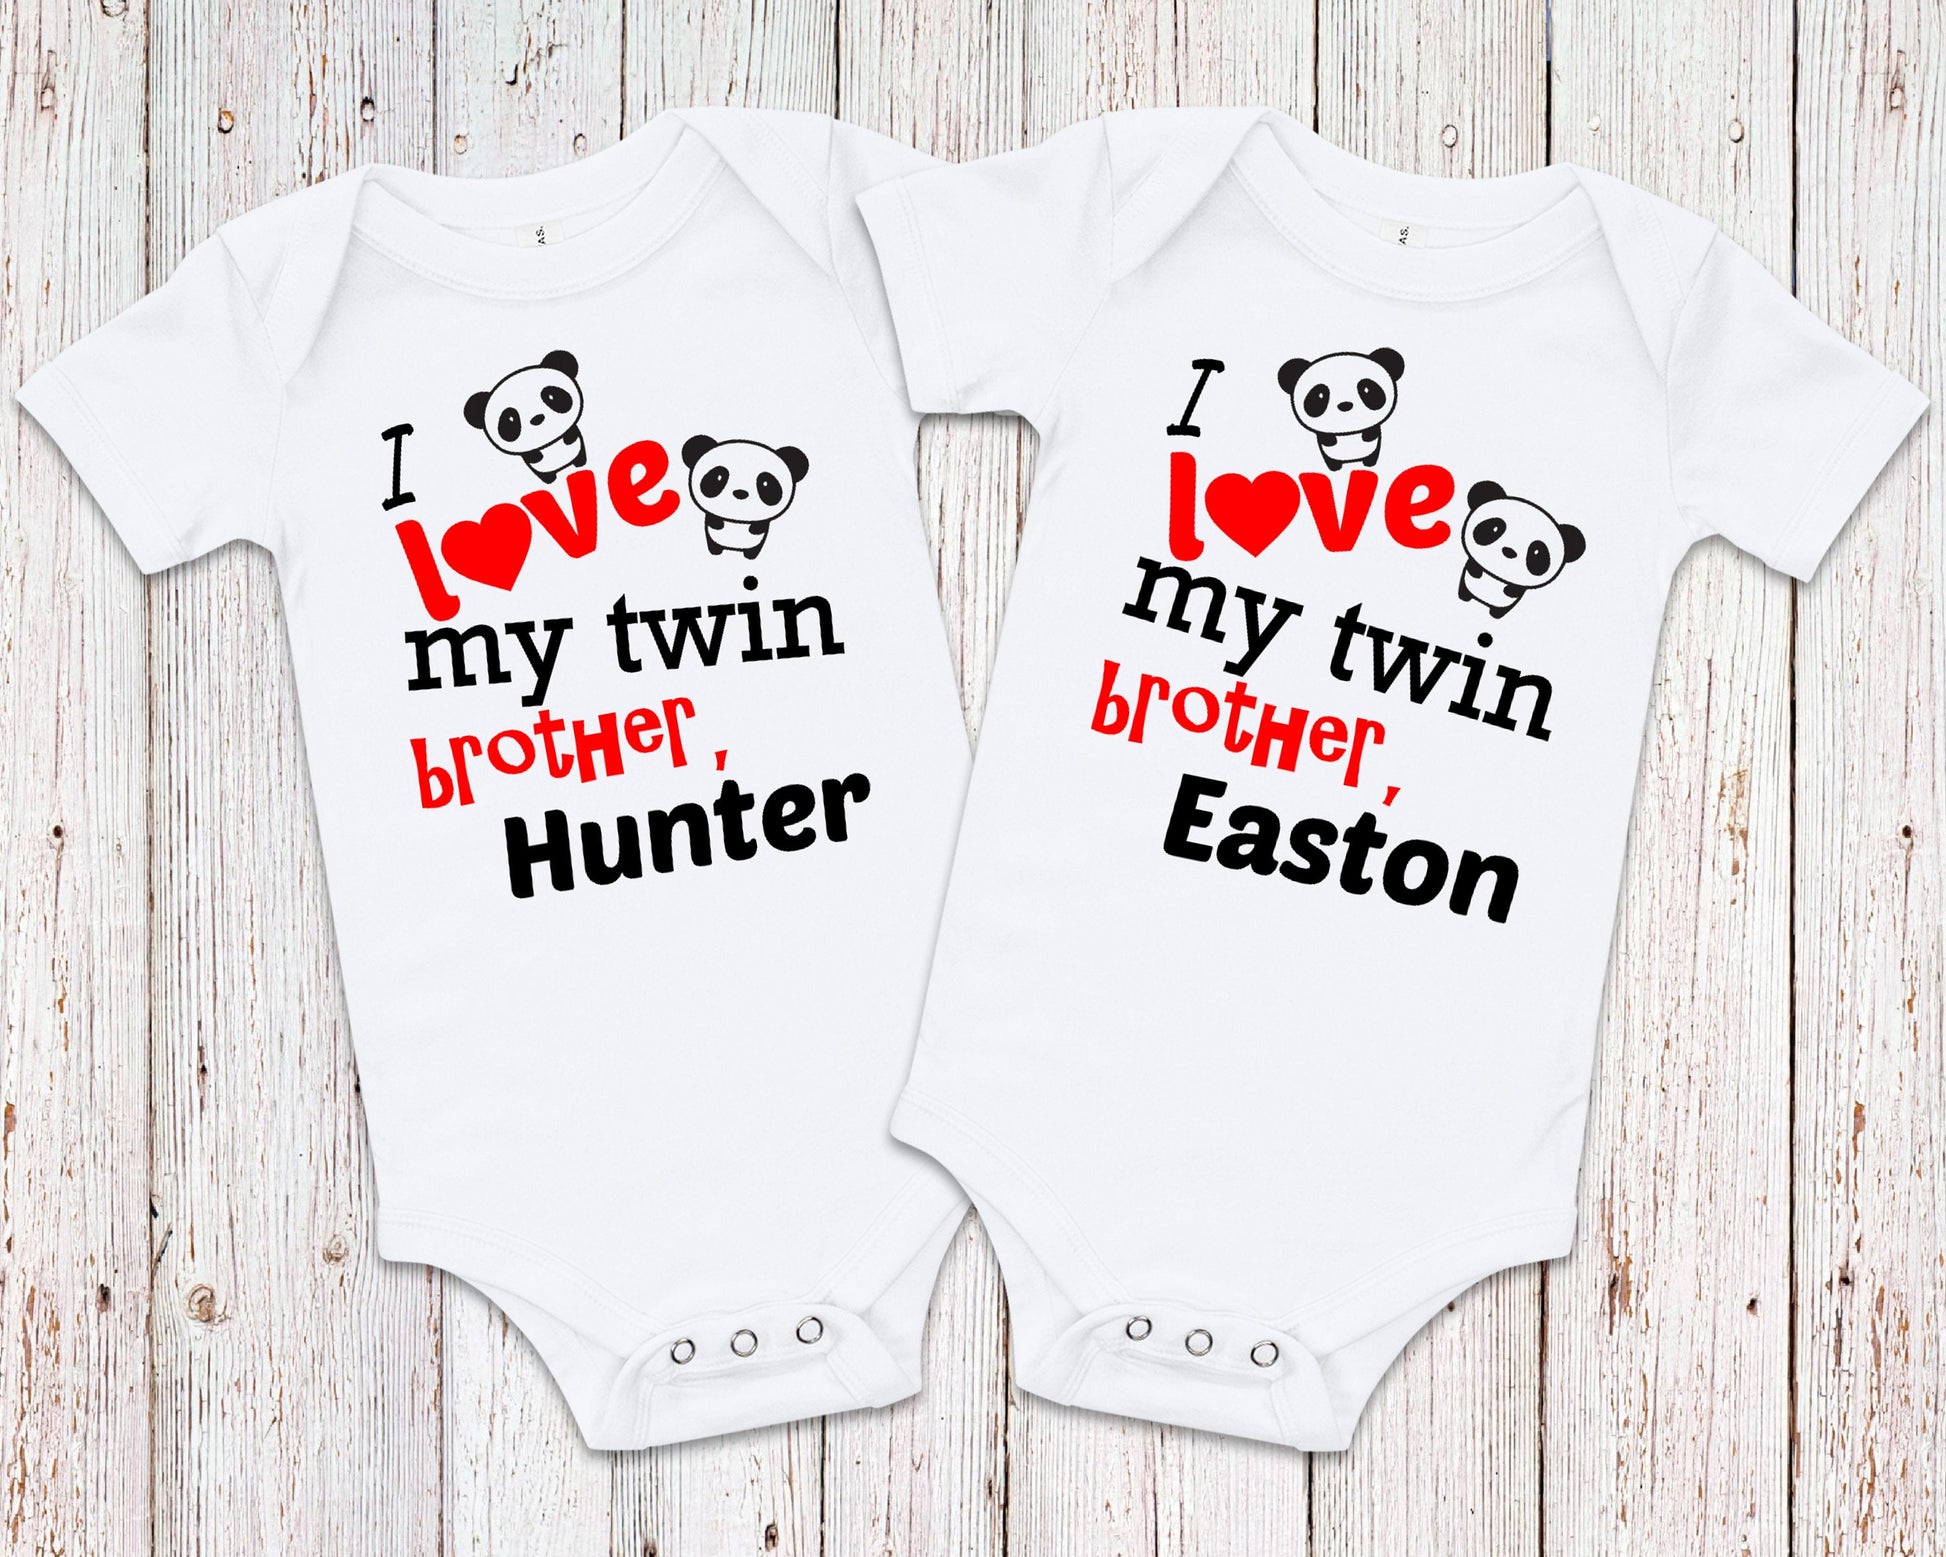 I Love My Twin Brother Twins T-Shirts or Bodysuits for Twin Boys - Identical Twins - Fraternal Twins - Brother Tees - boy twin tees